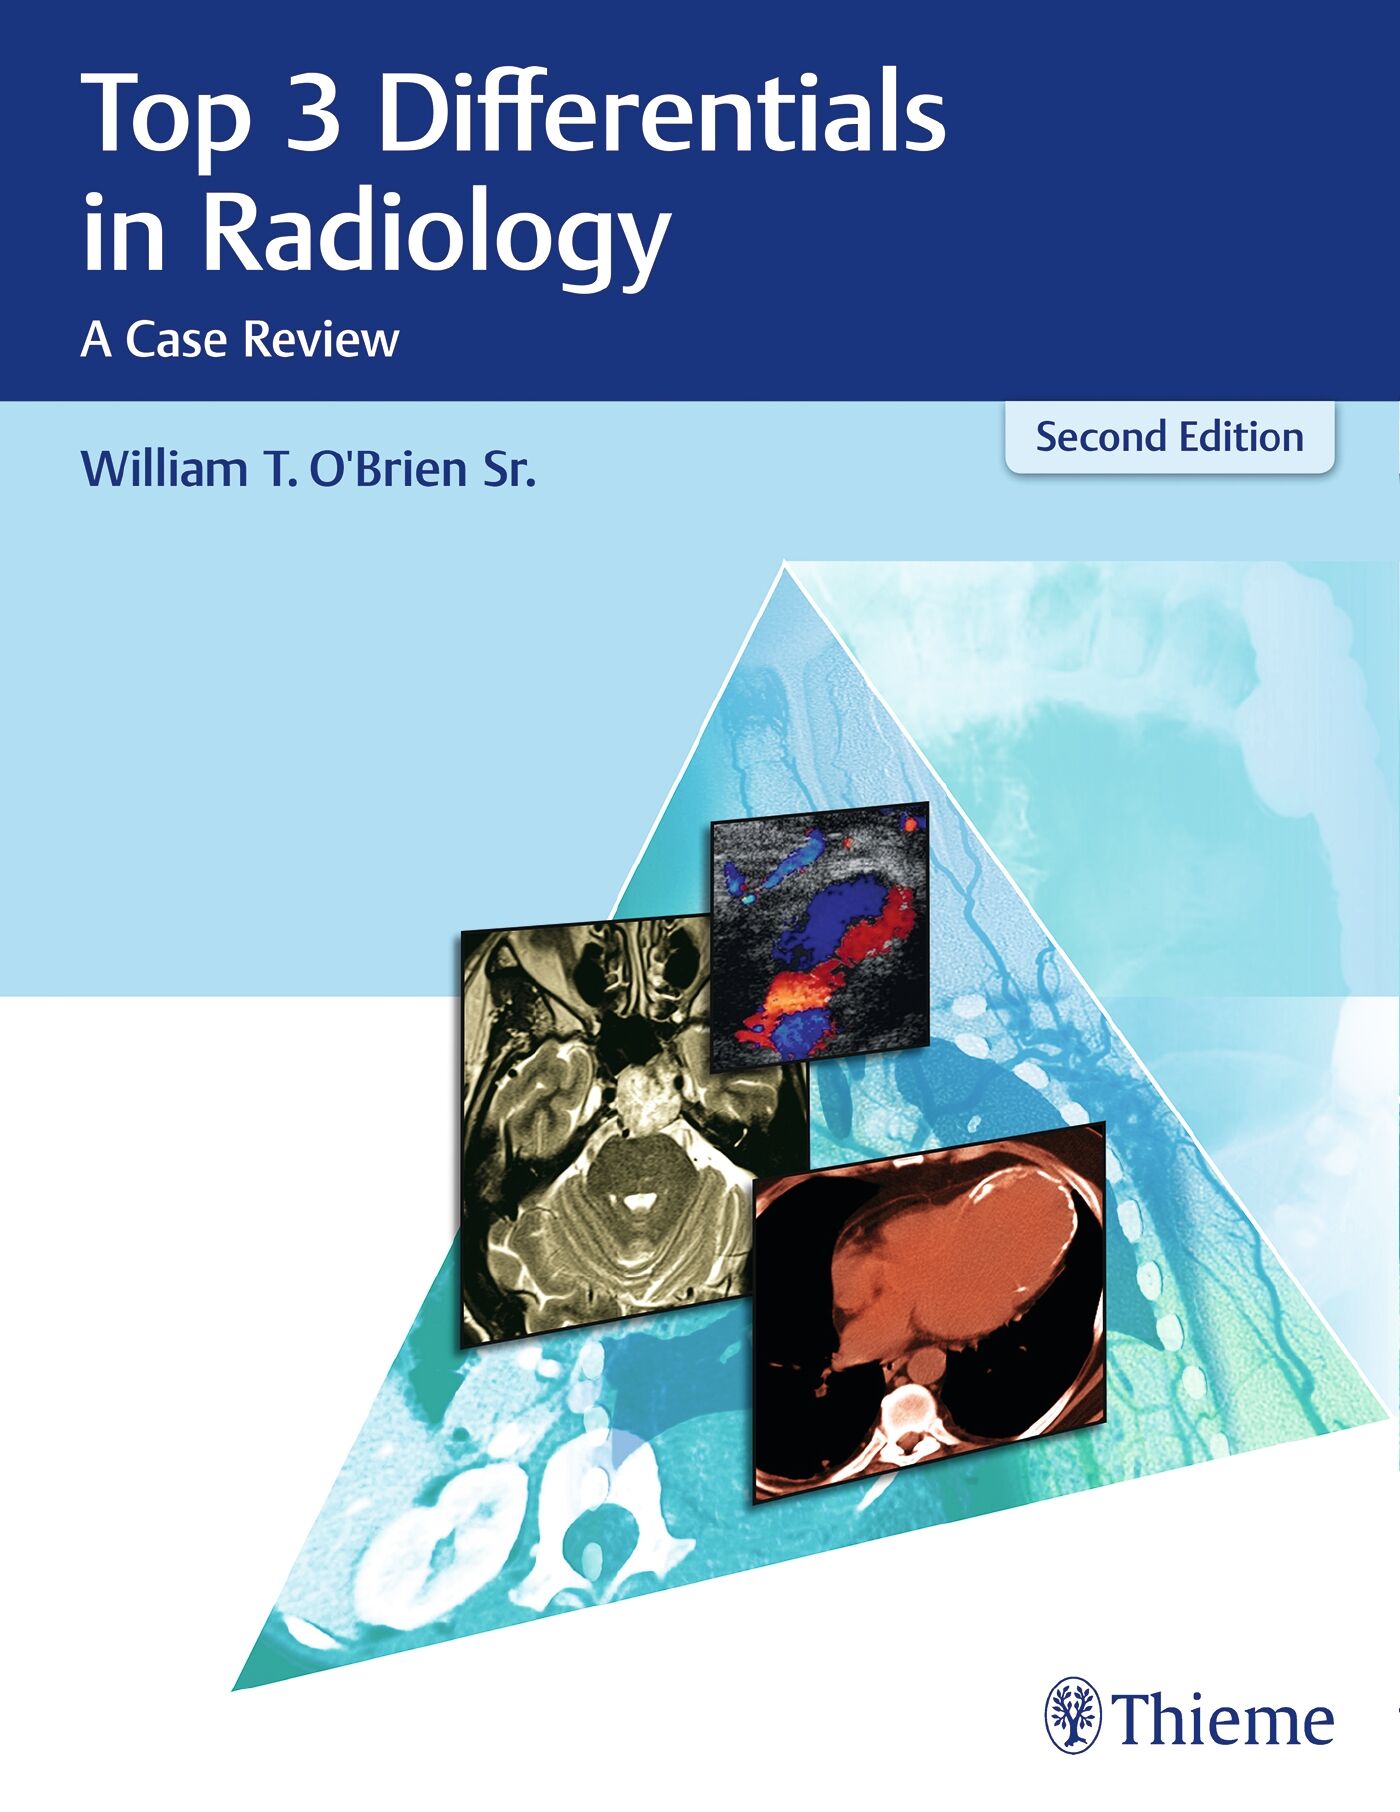 Top 3 Differentials in Radiology, 9781626232785